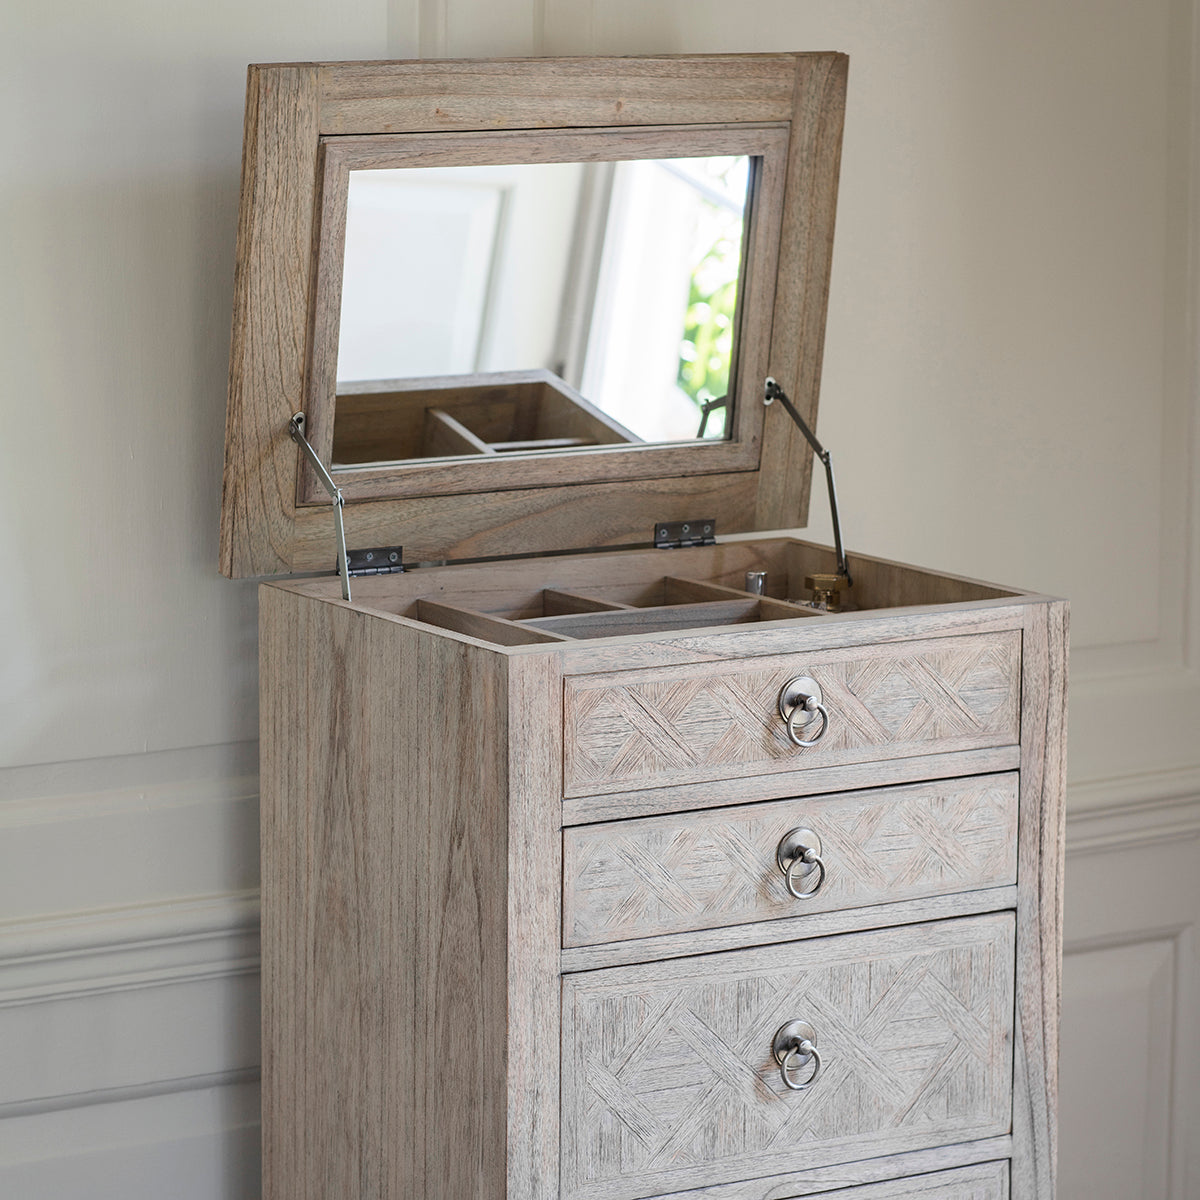 A Belsford 5 Drawer Lingerie Chest with a mirror on top for interior decor or home furniture needs.